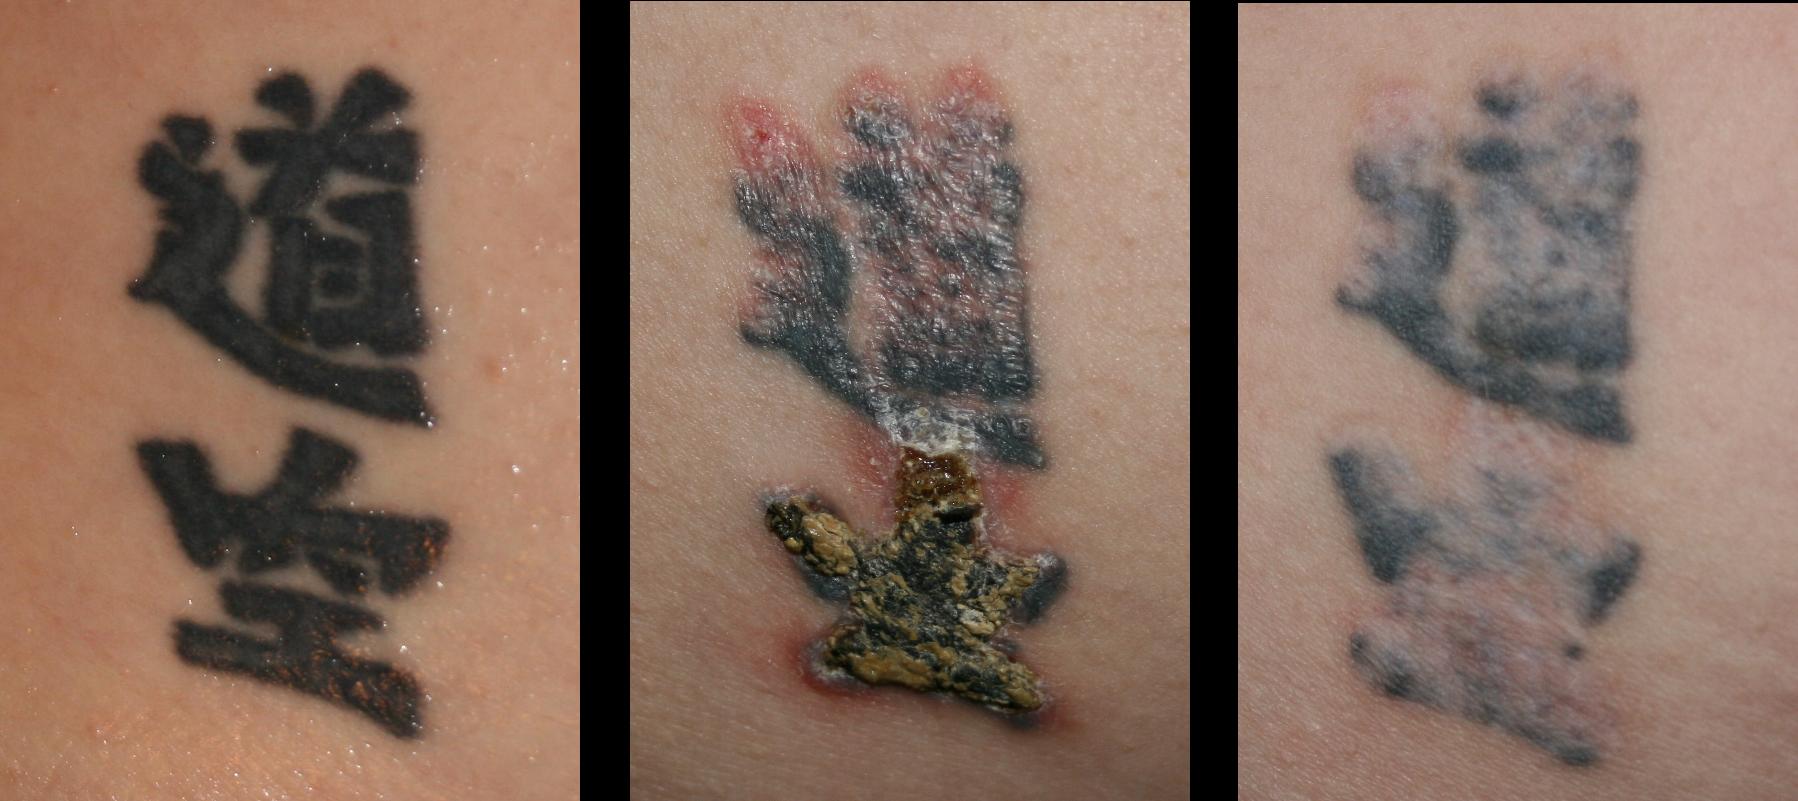 tattoo removal industry by combining laser and non laser technologies